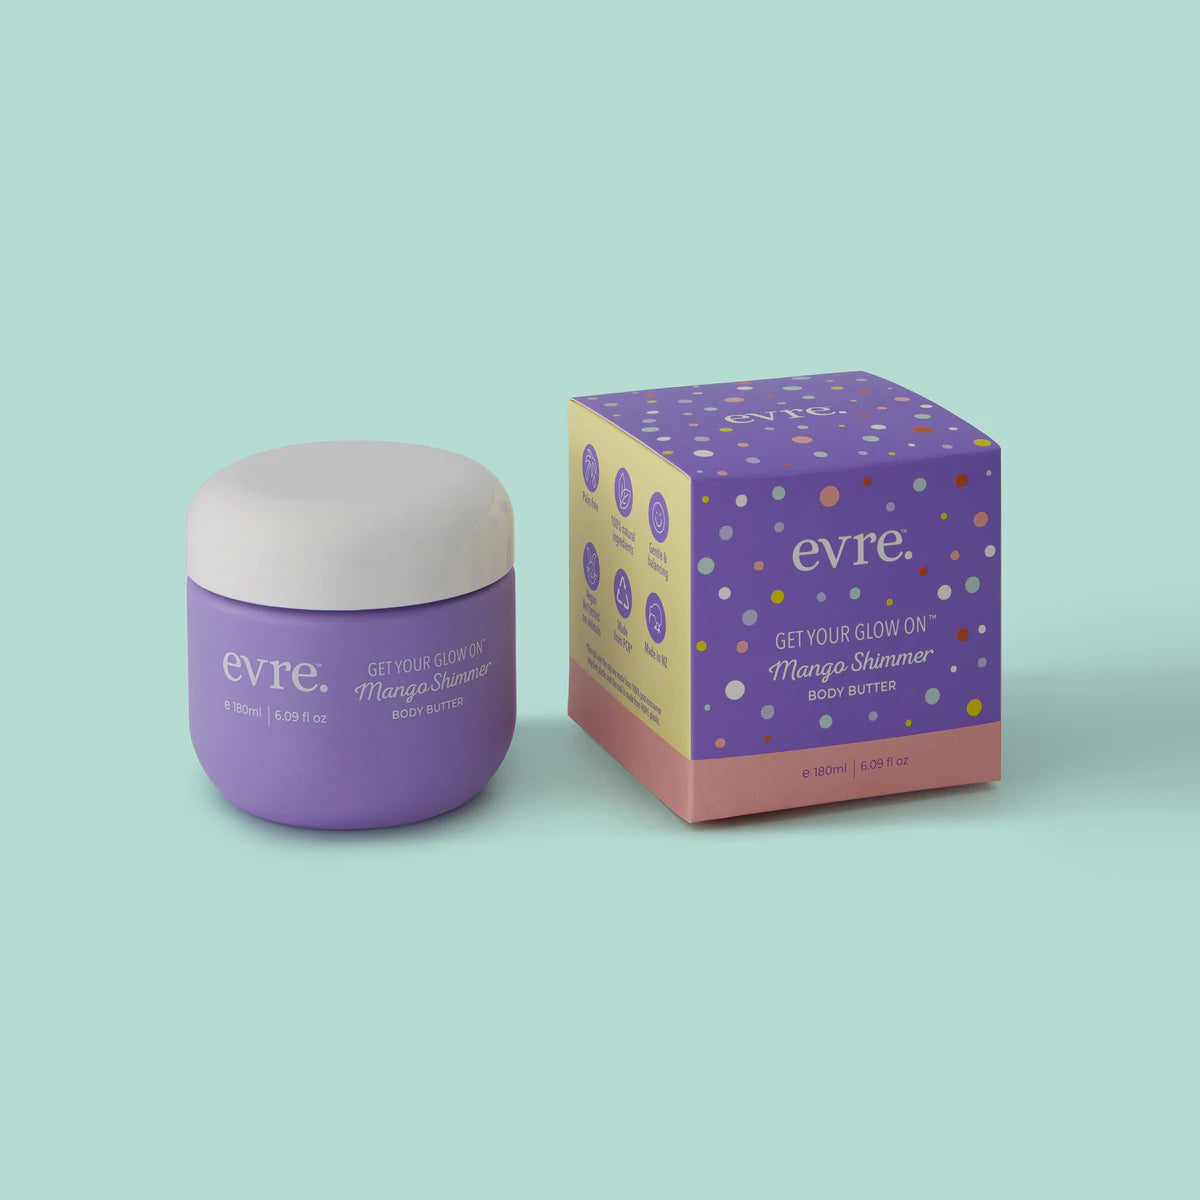 evre - Get Your Glow On Mango Shimmer Body Butter 180ml